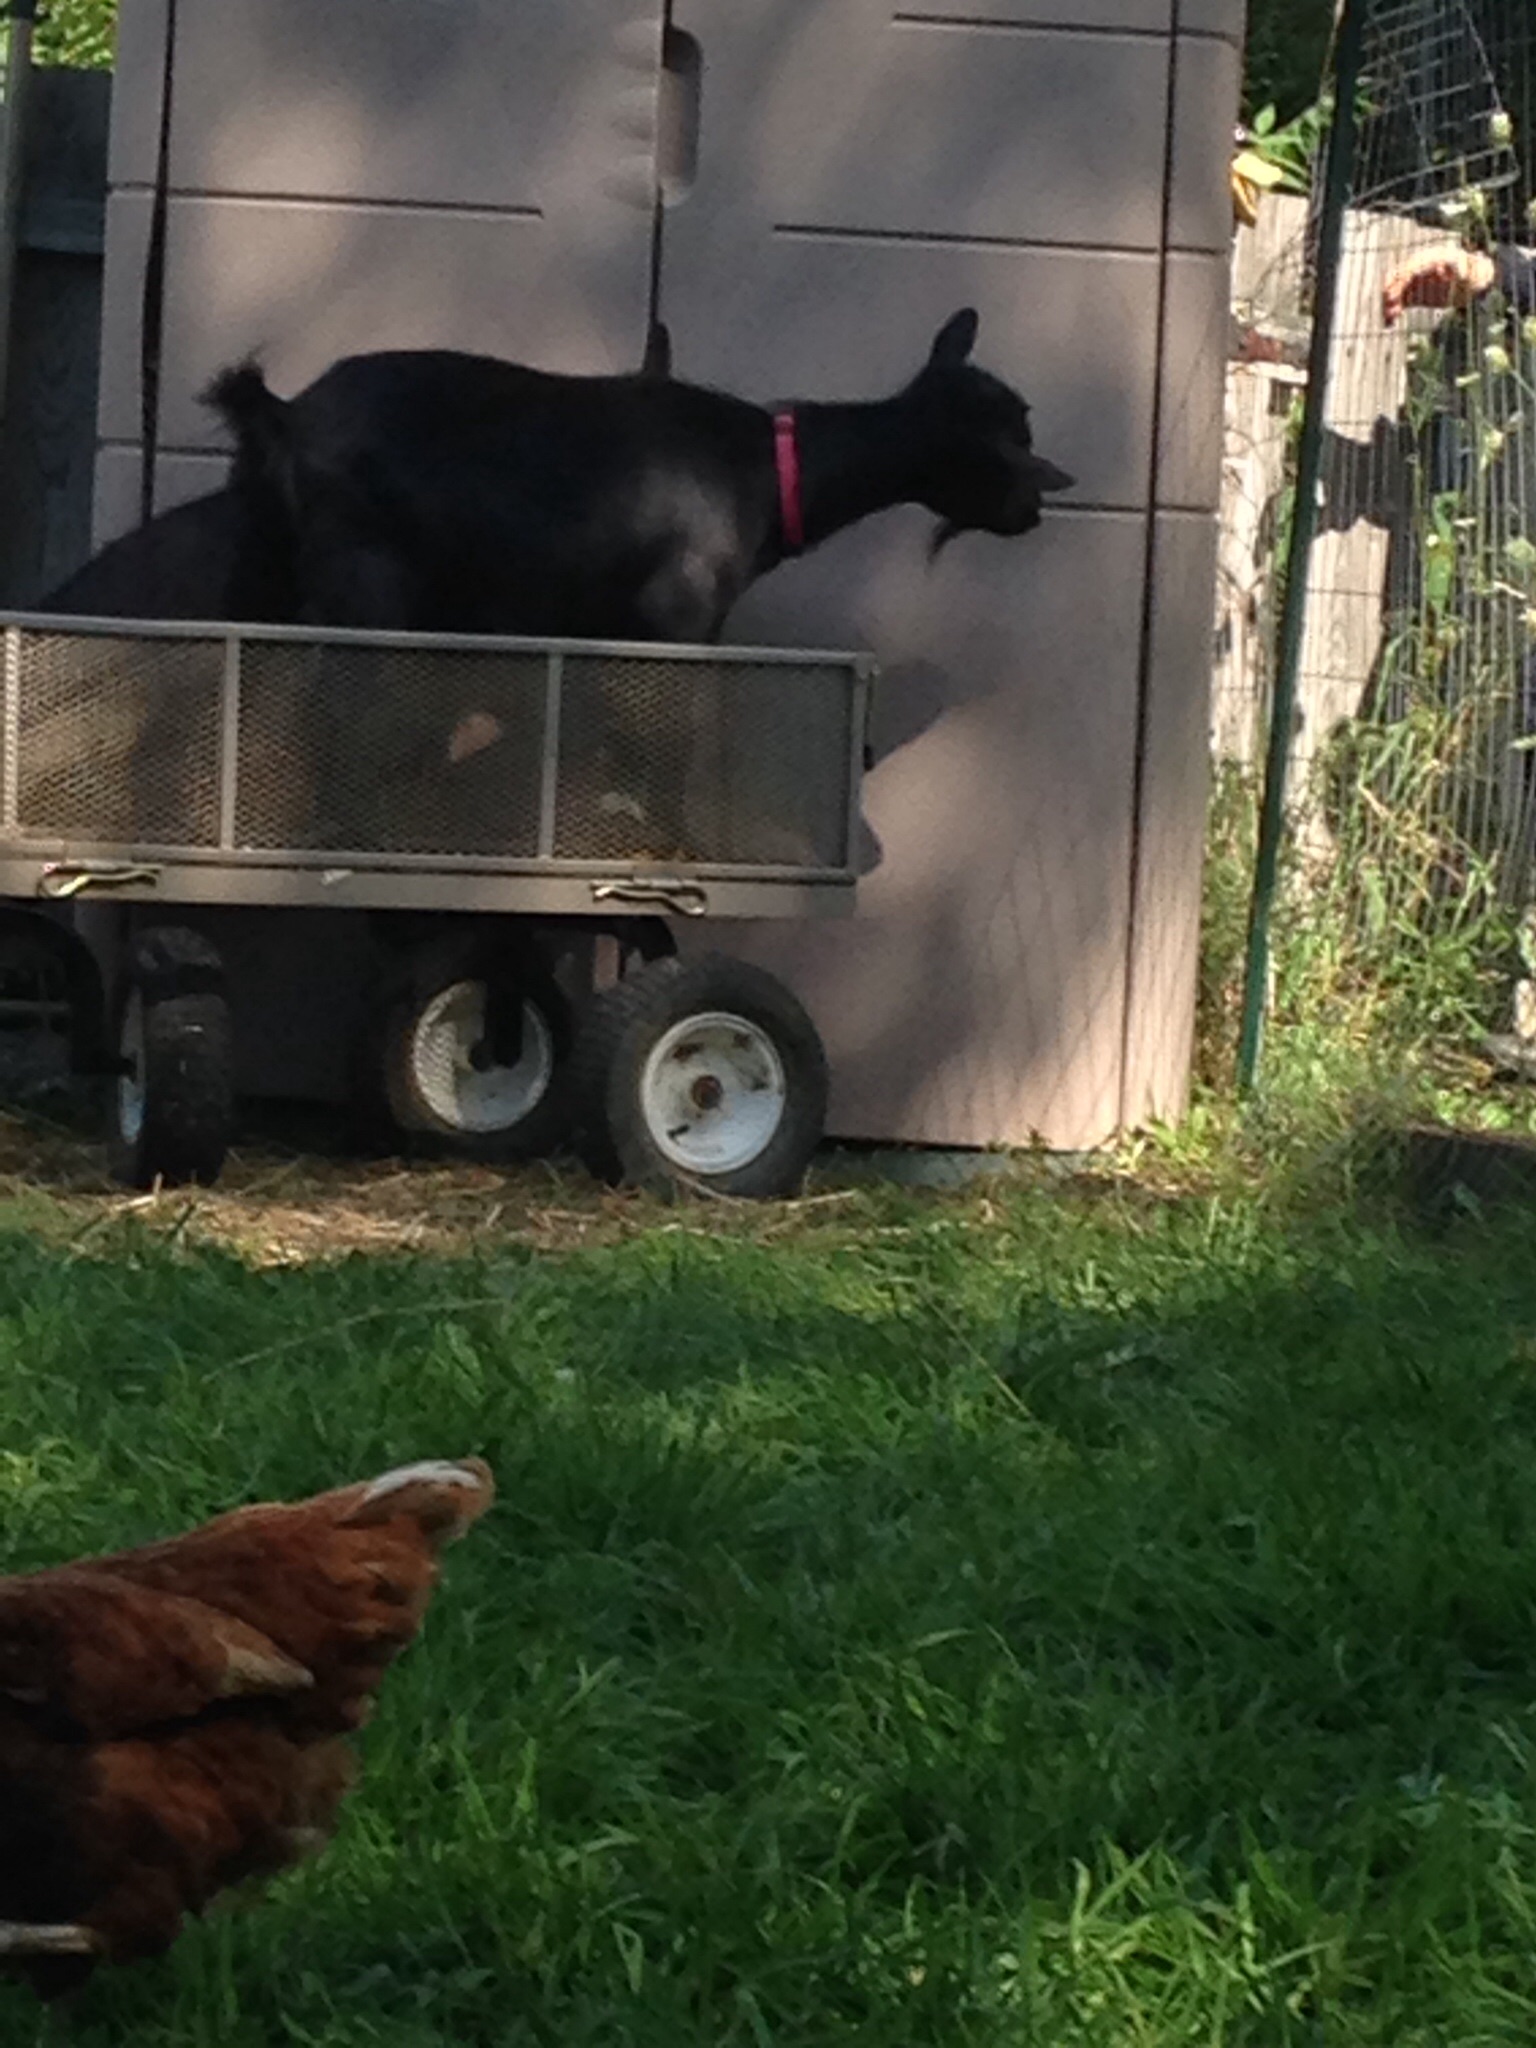 Frankie and Skittles are trying to take a ride. The chickens don't seem to mind them.